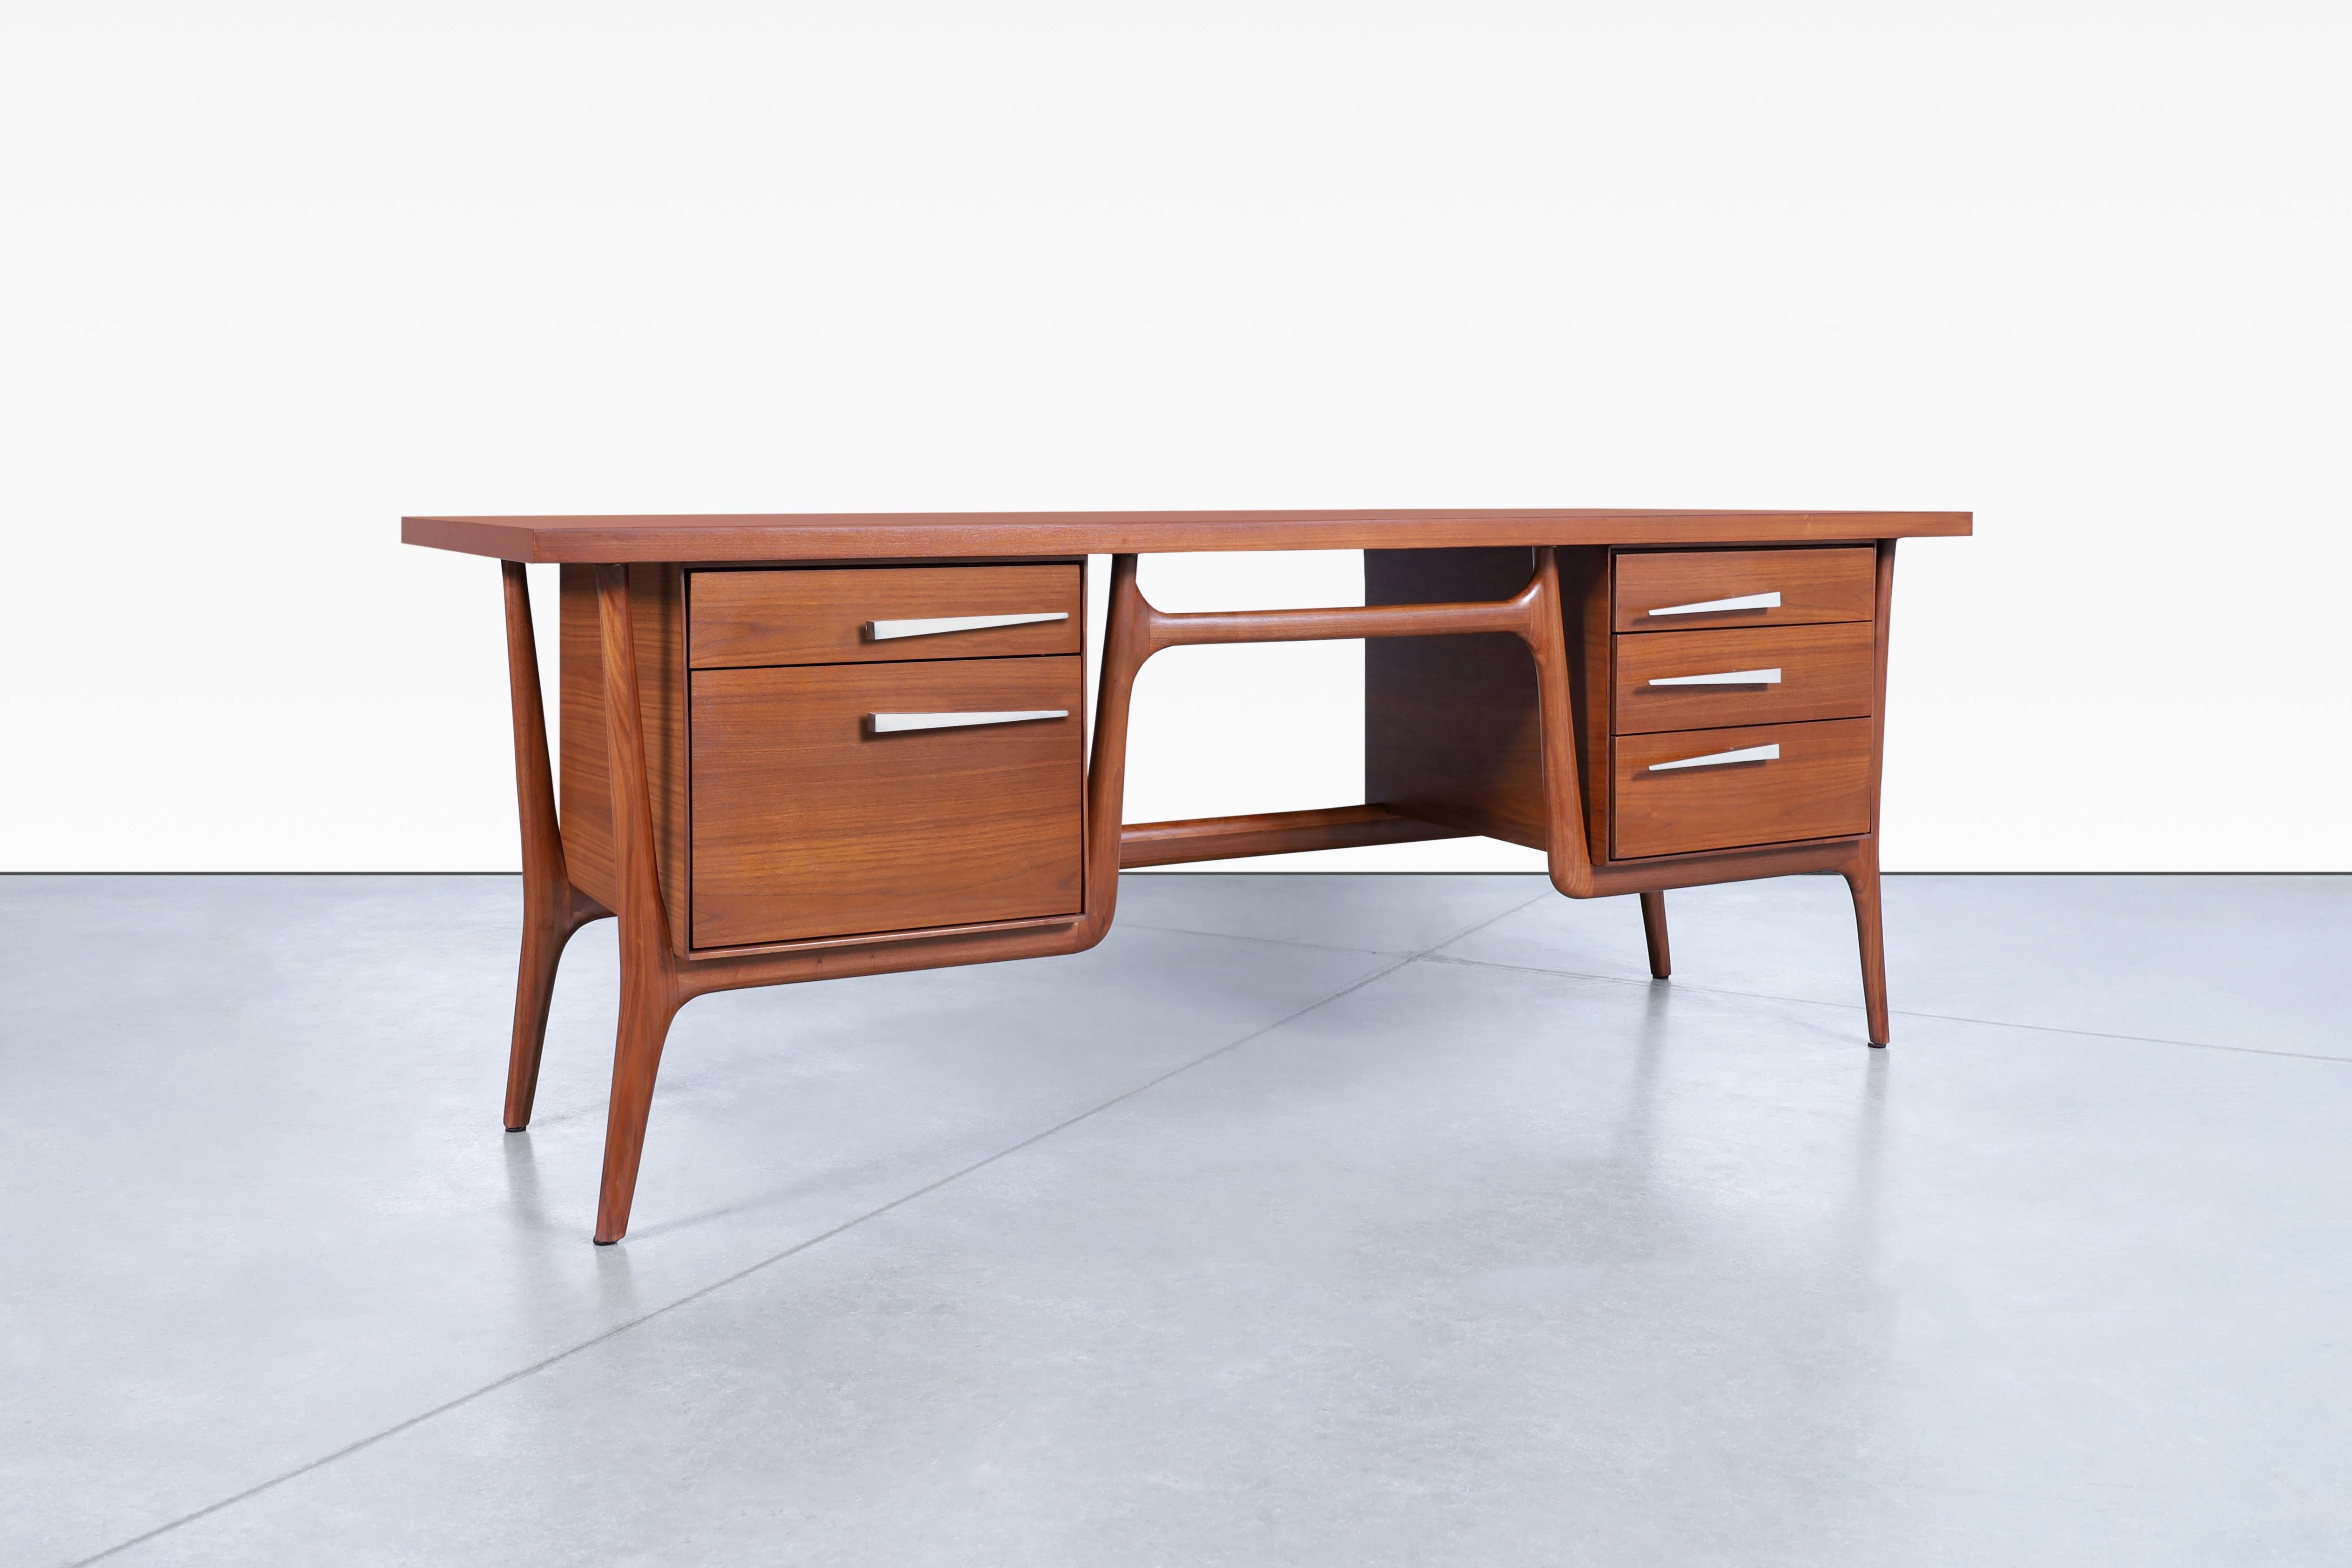 Stunning vintage sculptural walnut desk designed and manufactured by Leopold Co. of Burlington in the United States, circa 1950s. This desk has an avant-garde design combined with the finest of walnut results in a distinctive piece of furniture. The